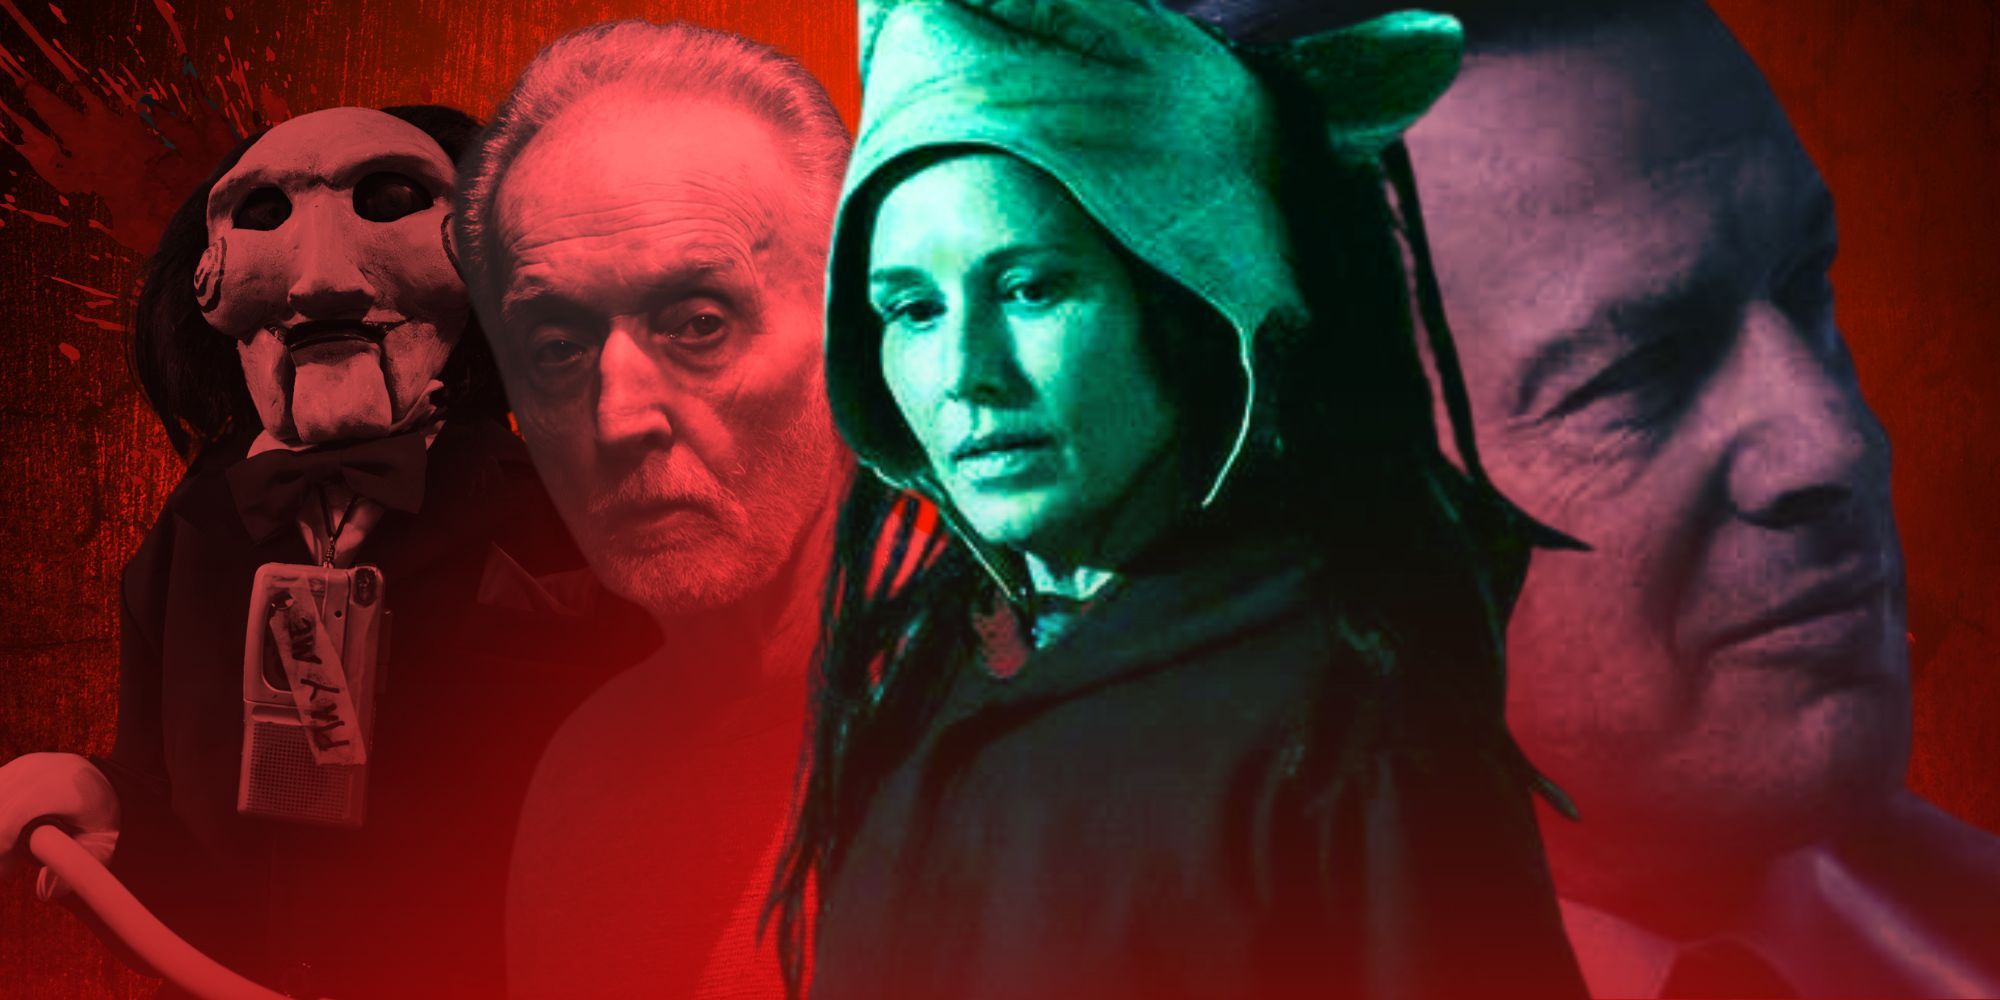 Billy next to Tobin Bell as John Kramer next to Shawnee Smith as Amanda with a mask on her head and with Costas Mandylor as Mark Hoffman in Saw